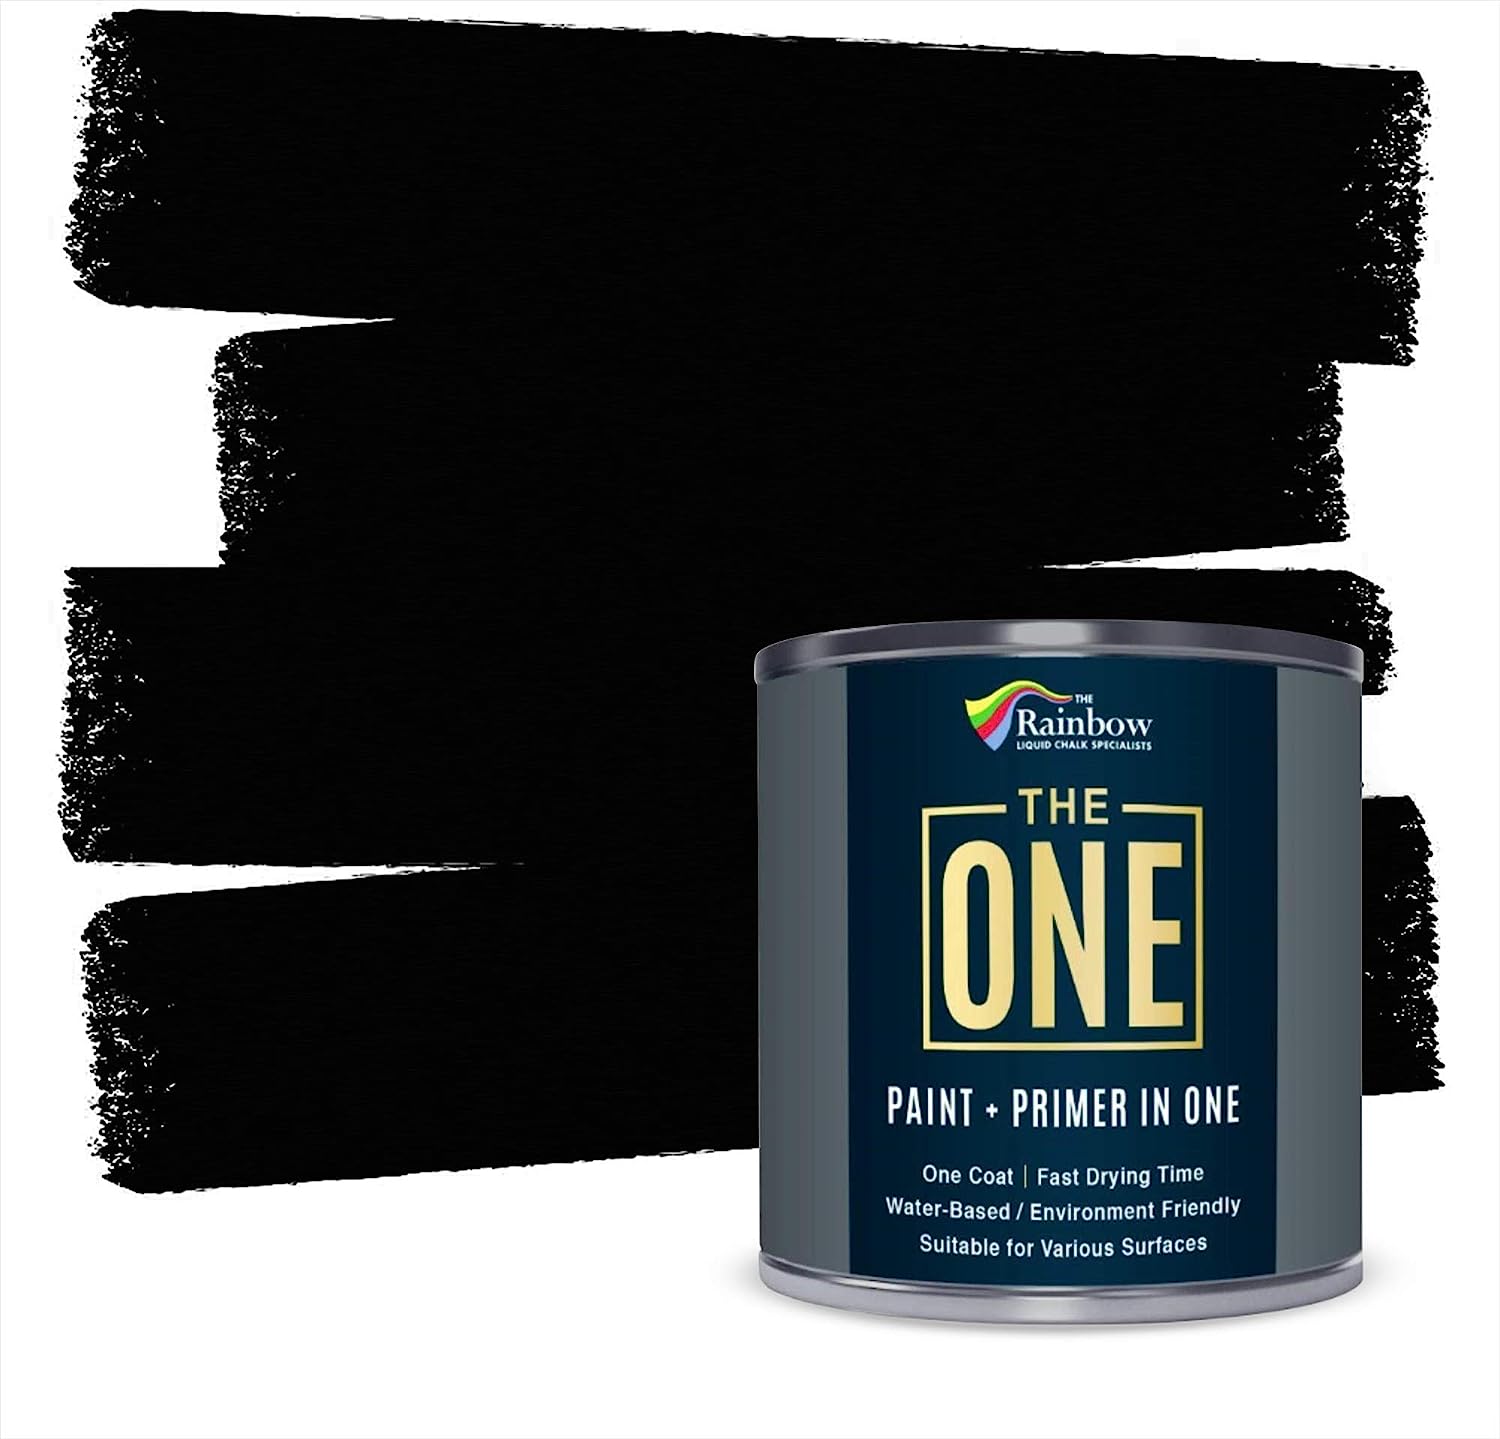 THE ONE Paint & Primer: Most Durable Furniture Paint, [...]